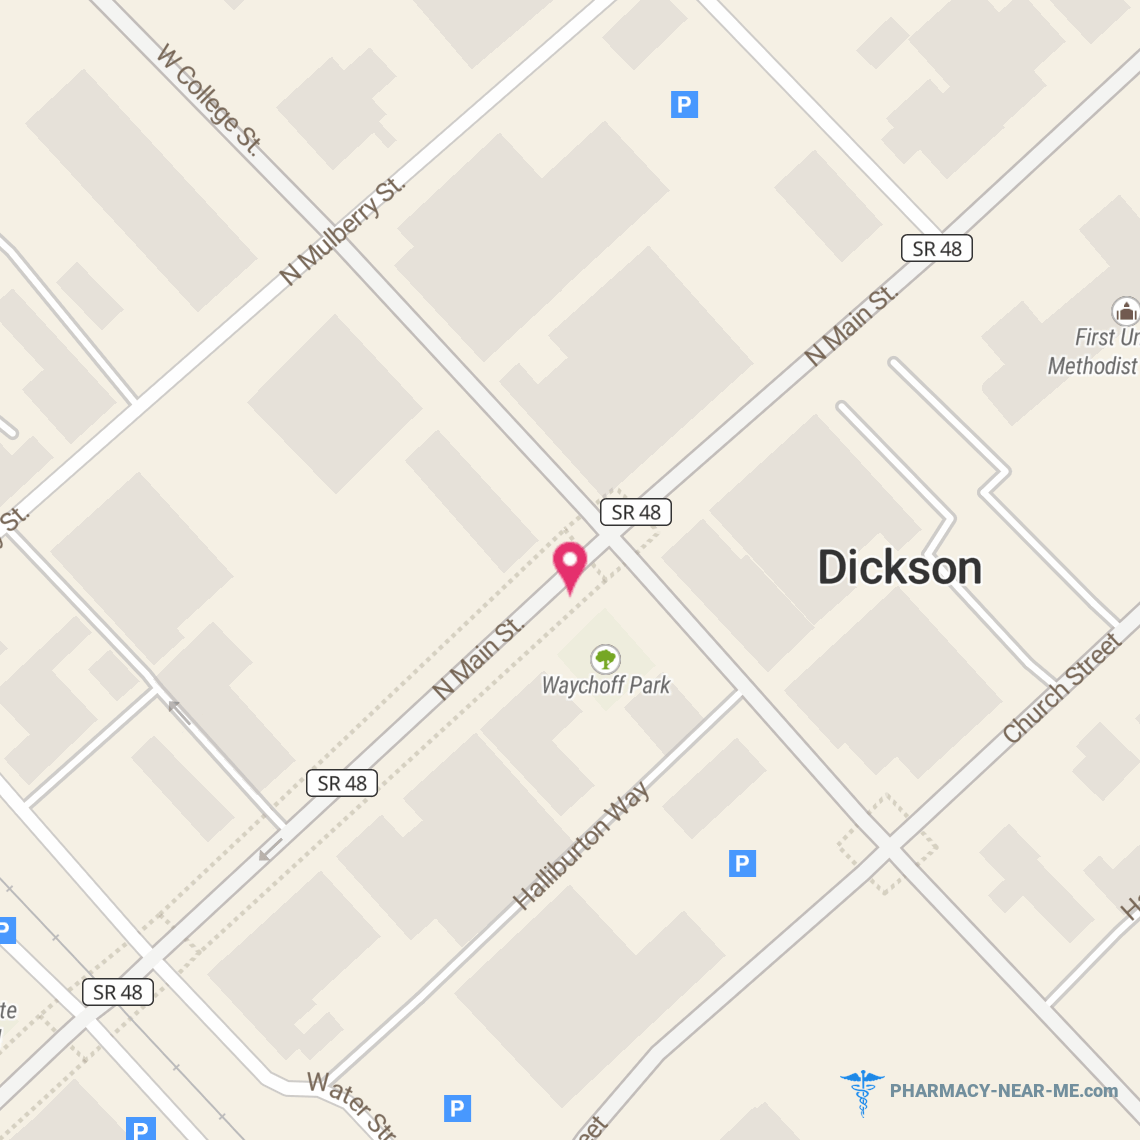 DICKSON APOTHECARY - Pharmacy Hours, Phone, Reviews & Information: 104 Hwy 70 E, Dickson, Tennessee 37055, United States